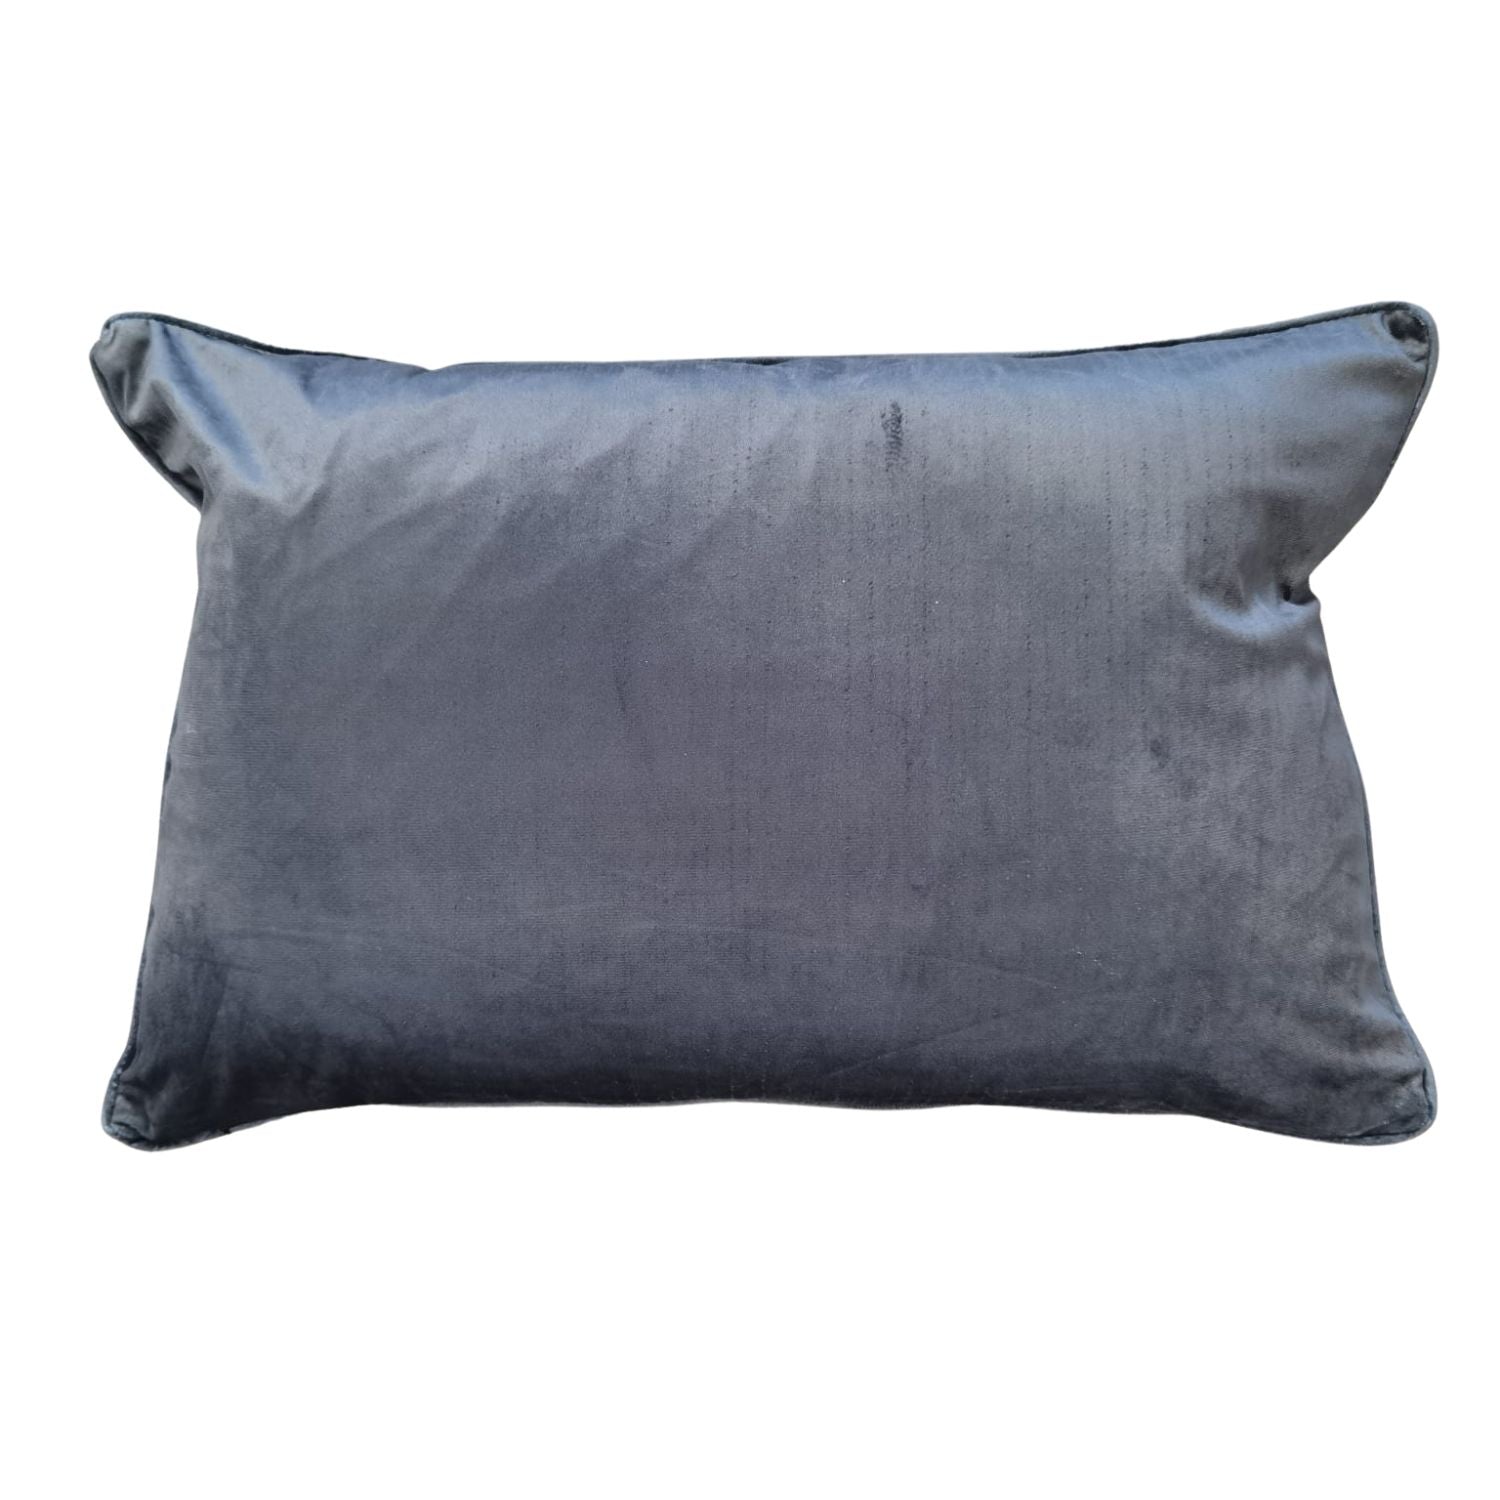 The Home Living Room Printed Piped Cushion - Blue &amp; Cream 2 Shaws Department Stores